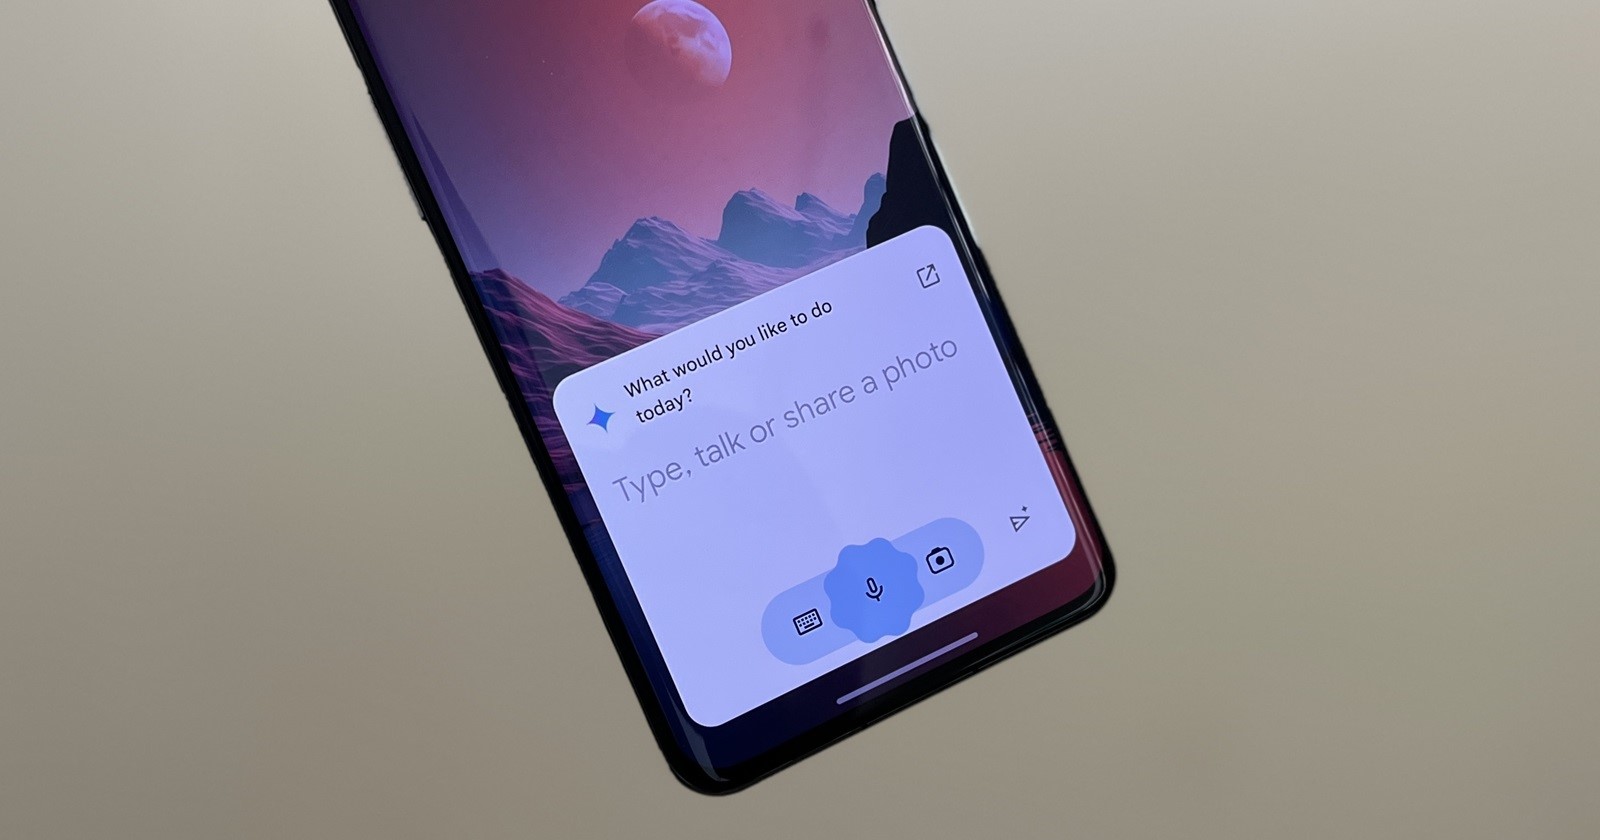 Gemini app on your Pixel can’t perform some tasks on lock screen that Google Assistant can